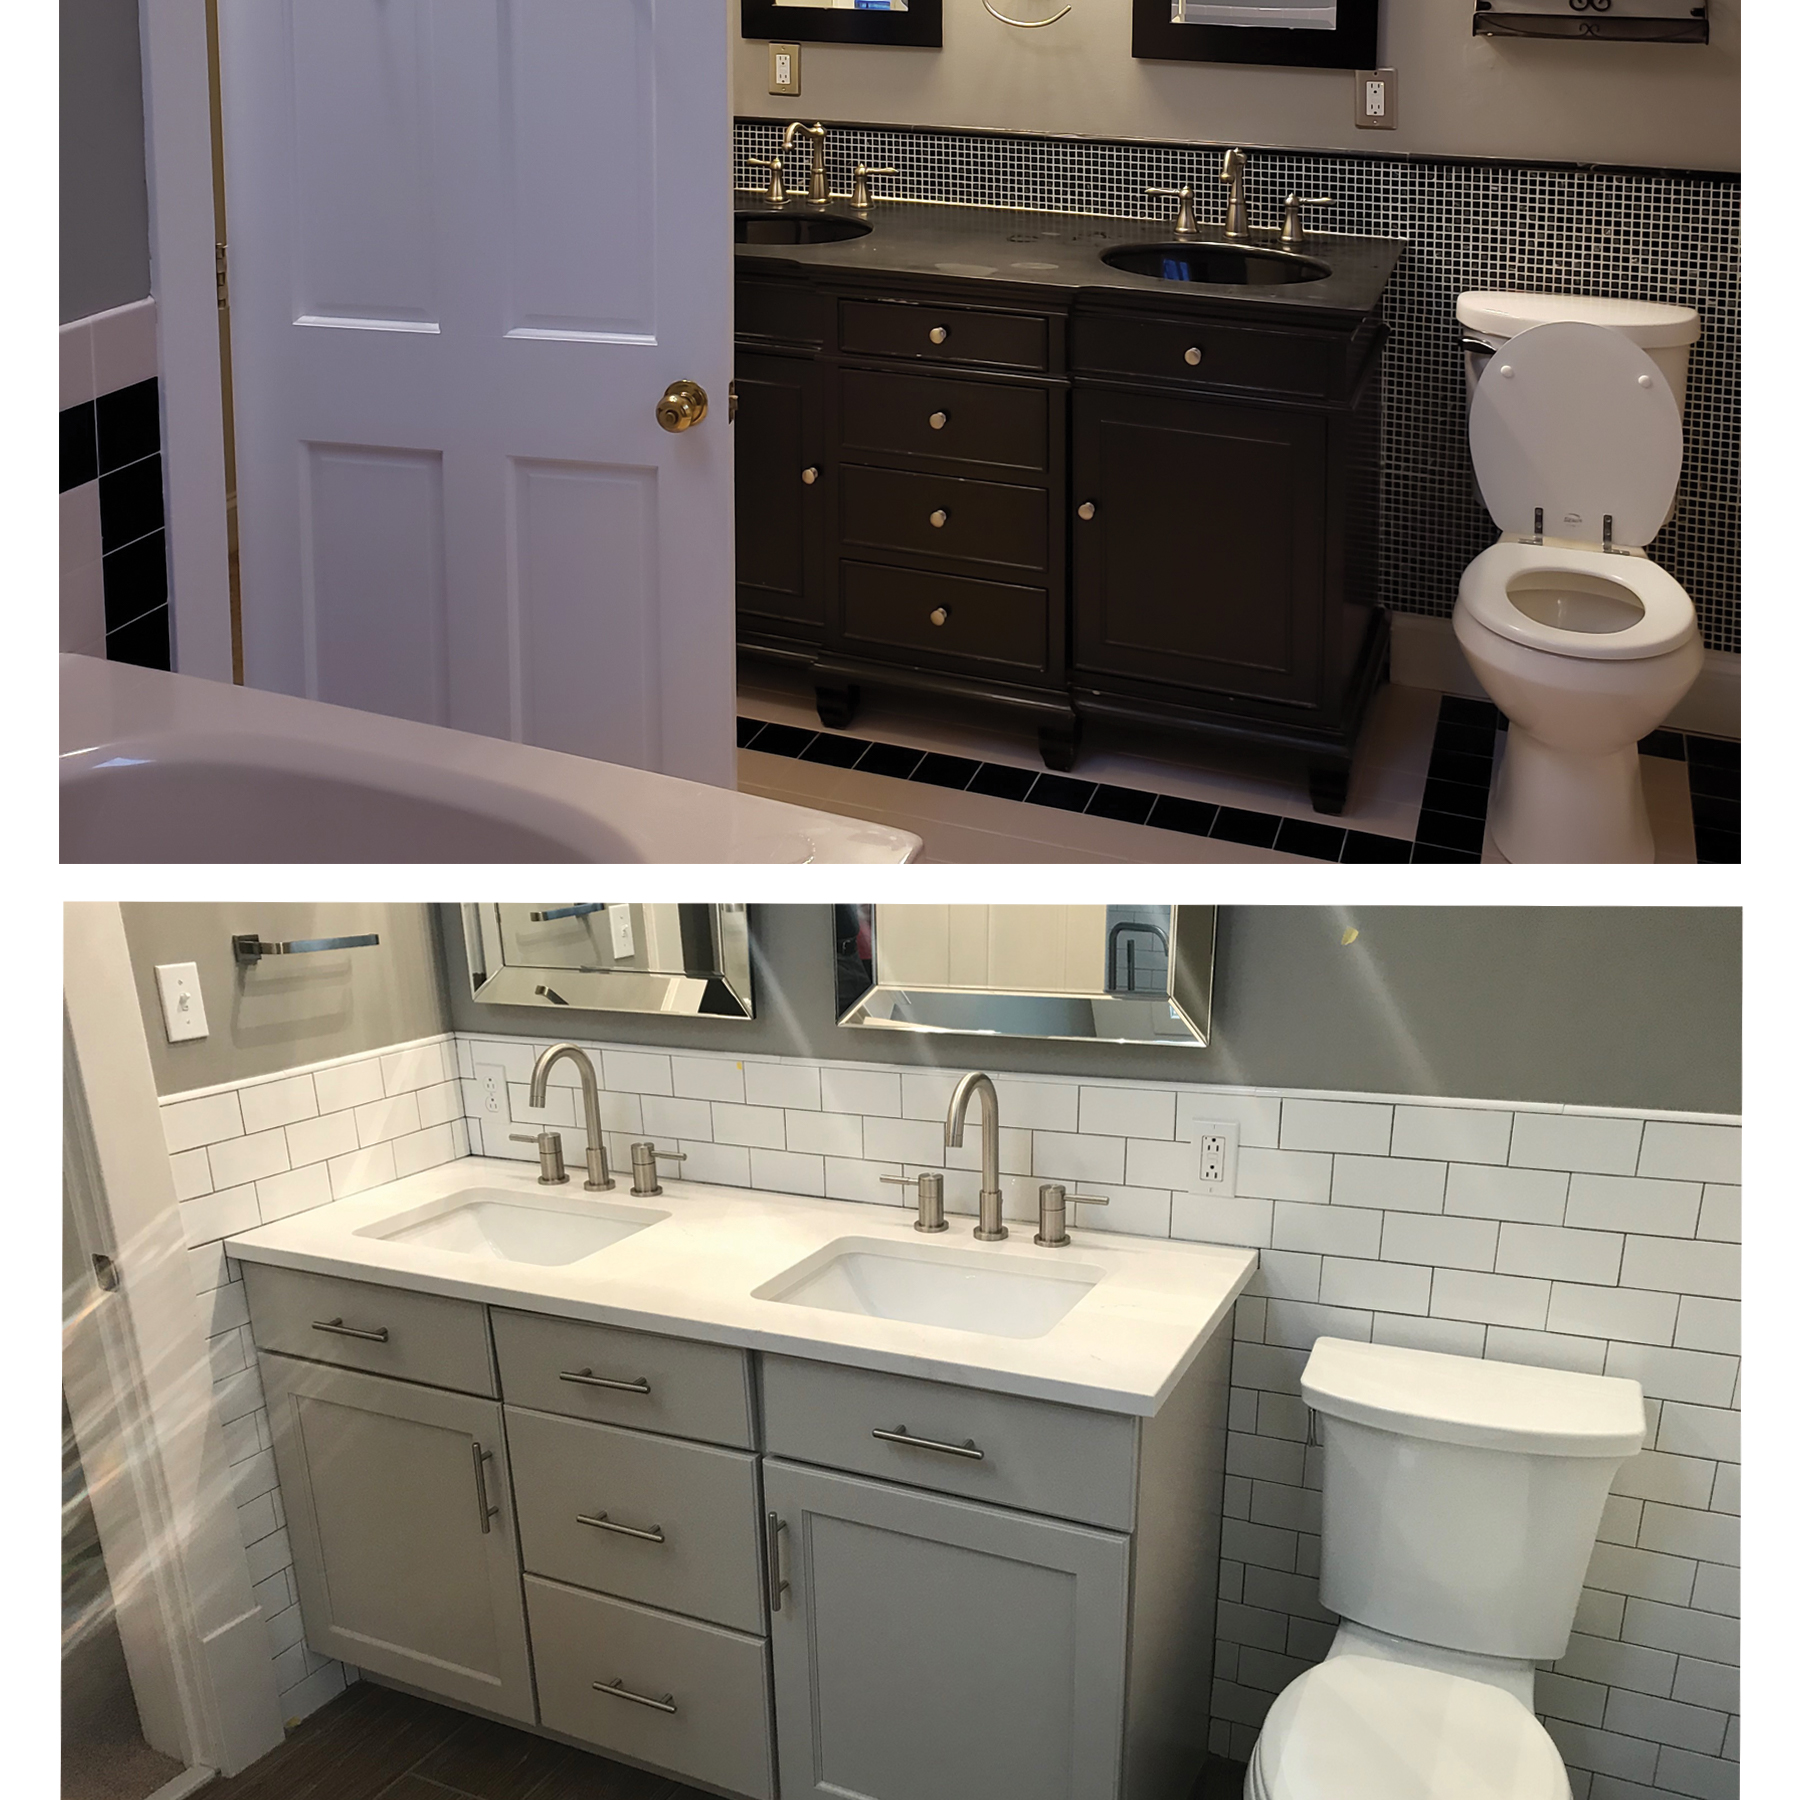 Before and After Bathroom Upgrade